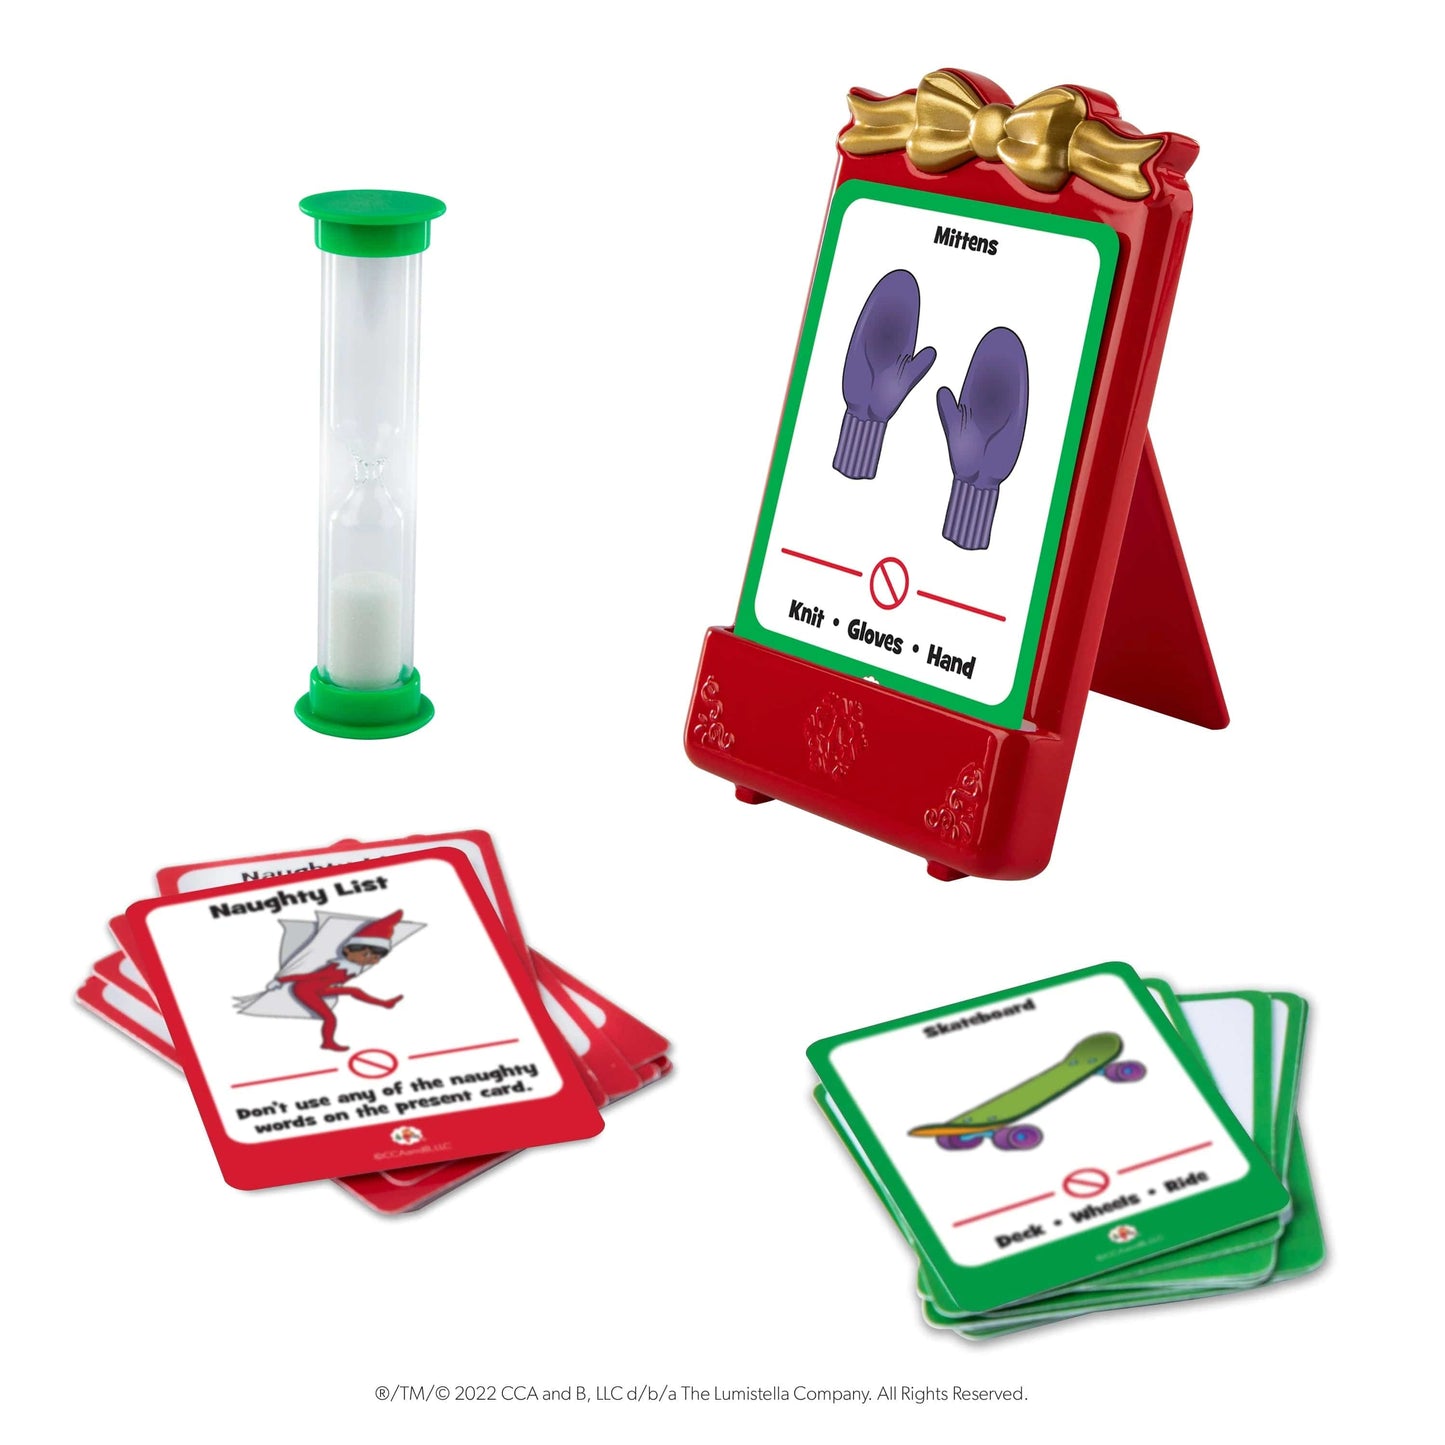 The Elf on the Shelf Merry Guess-mas Card Game